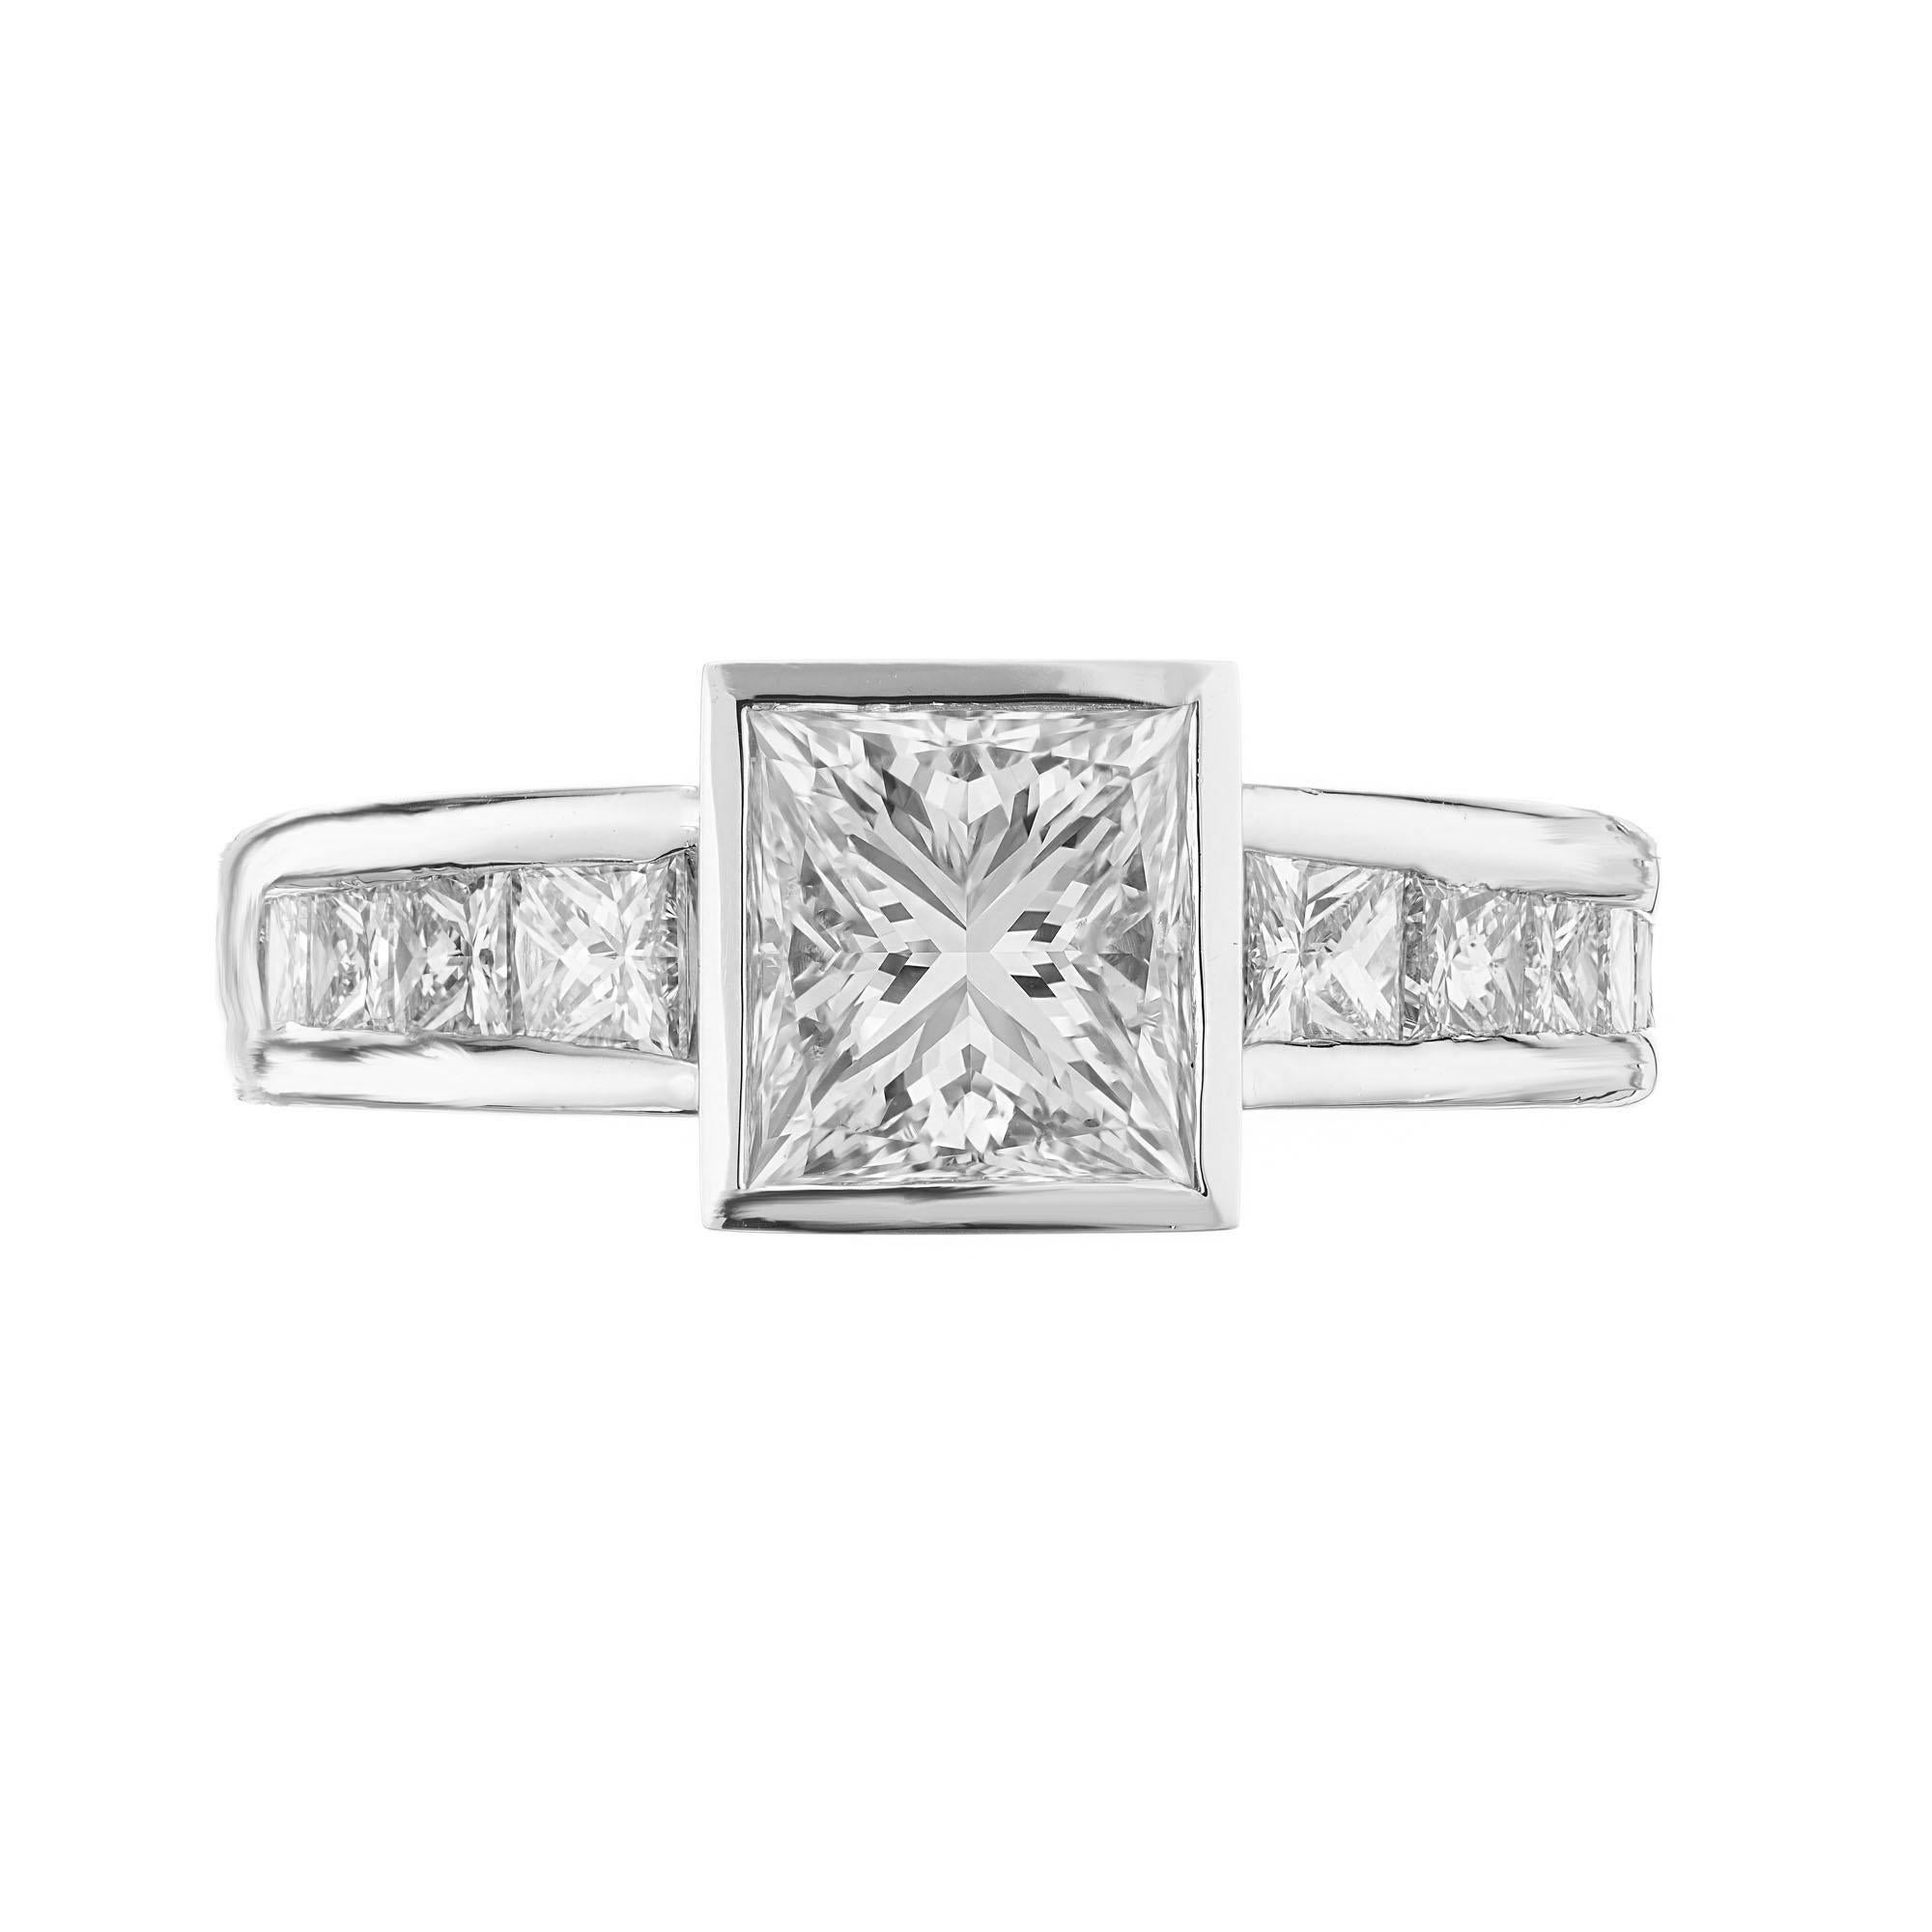 Diamond engagement ring. GIA certified princess cut, bezel set center stone.  Set in platinum with 10 princess cut graduated, channel set accent diamonds.  Created in the Peter Suchy Workshop. 

1 princess cut diamond, H VS2 approx. 1.70cts GIA